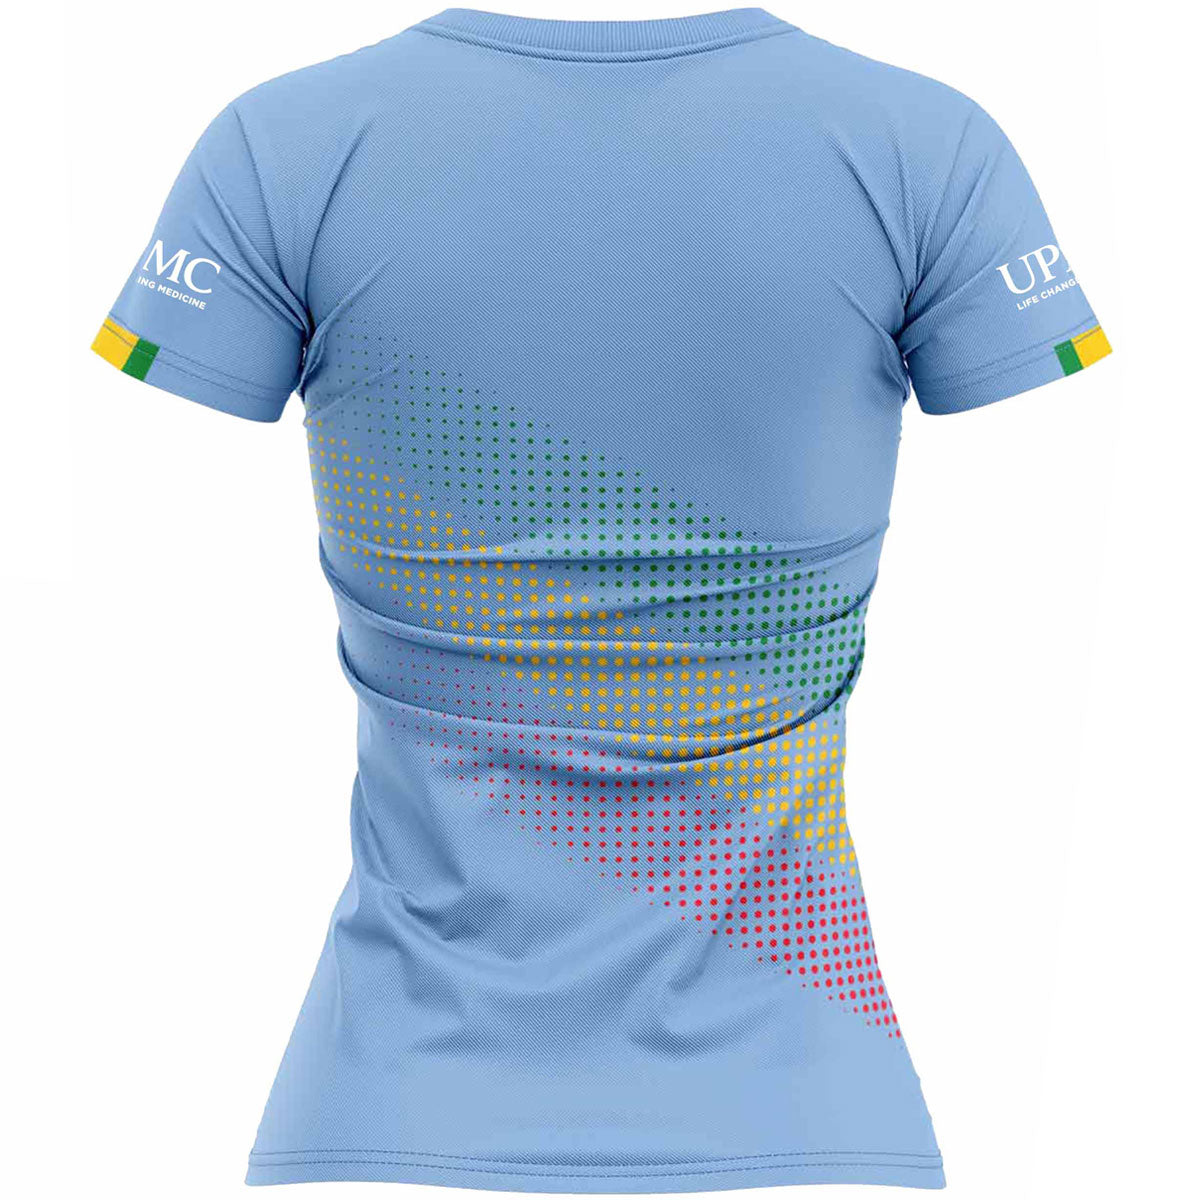 Mc Keever Carlow Ladies LGFA Official Training Jersey - Womens - Blue